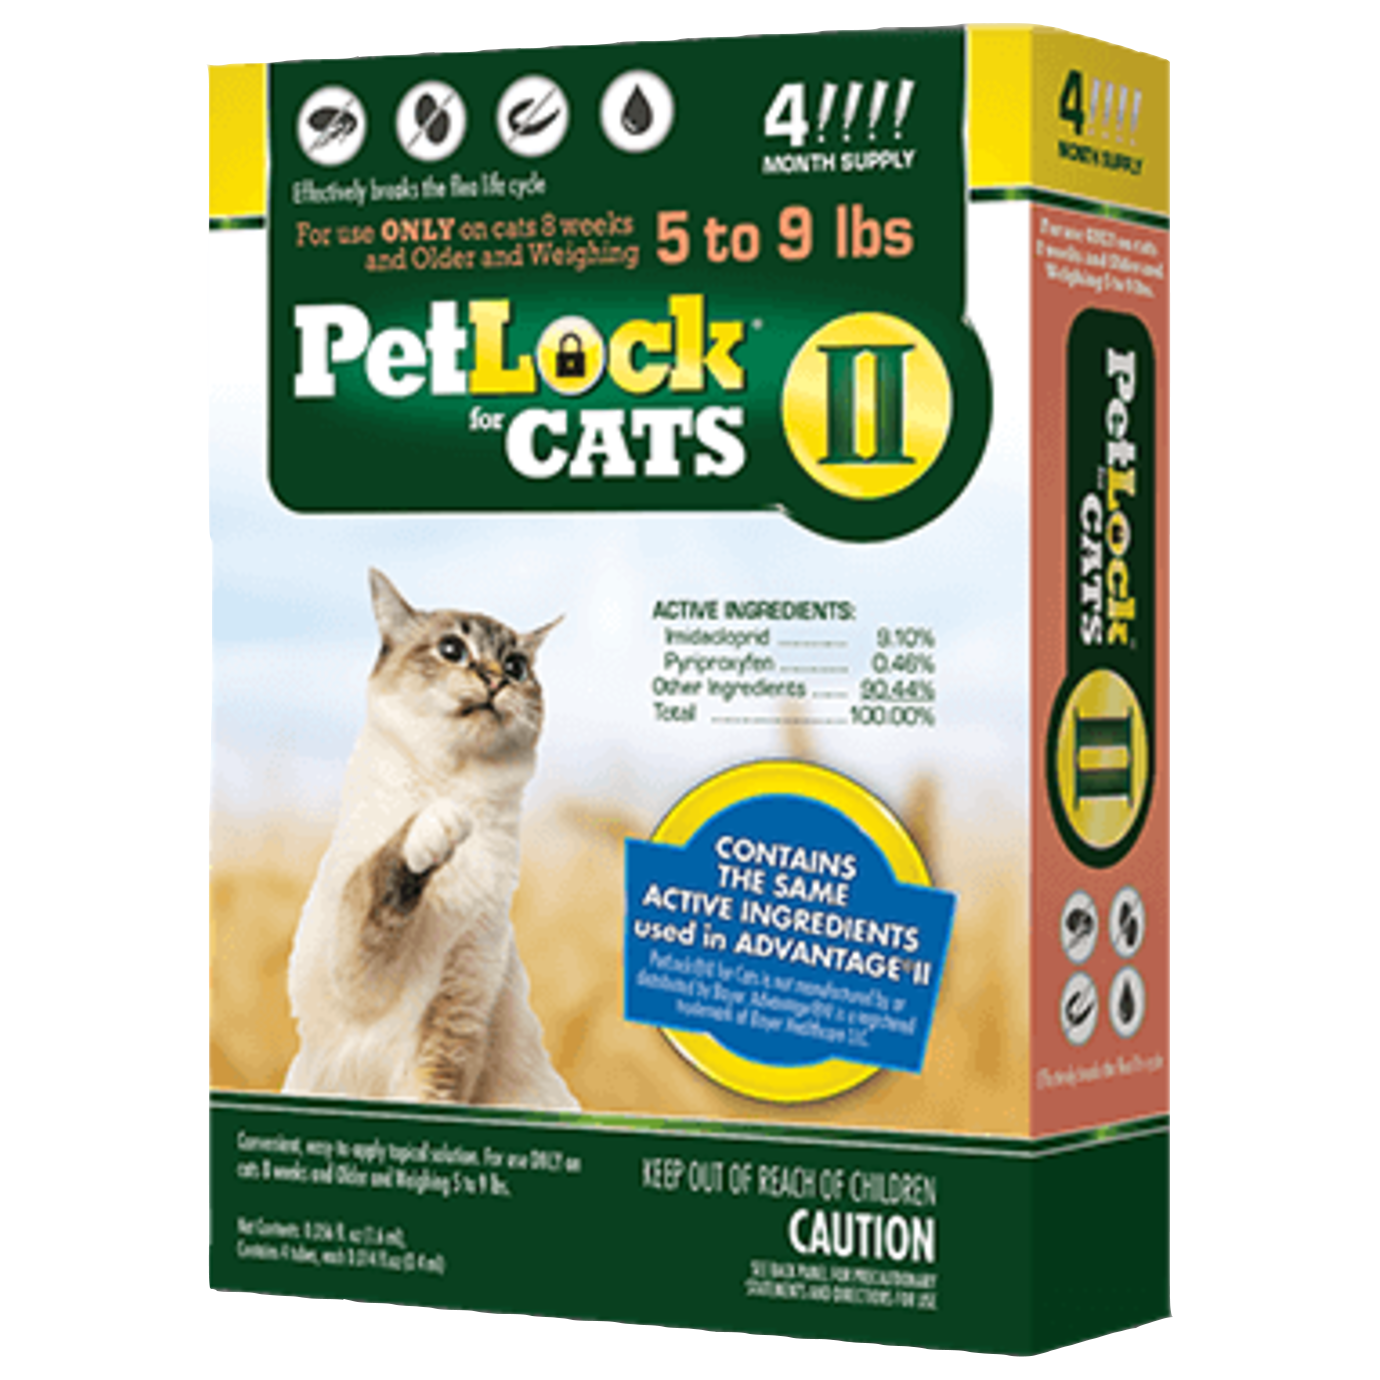 PetLock Duo Flea and Tick for Cats 5 - 9lb - 4 Month Supply